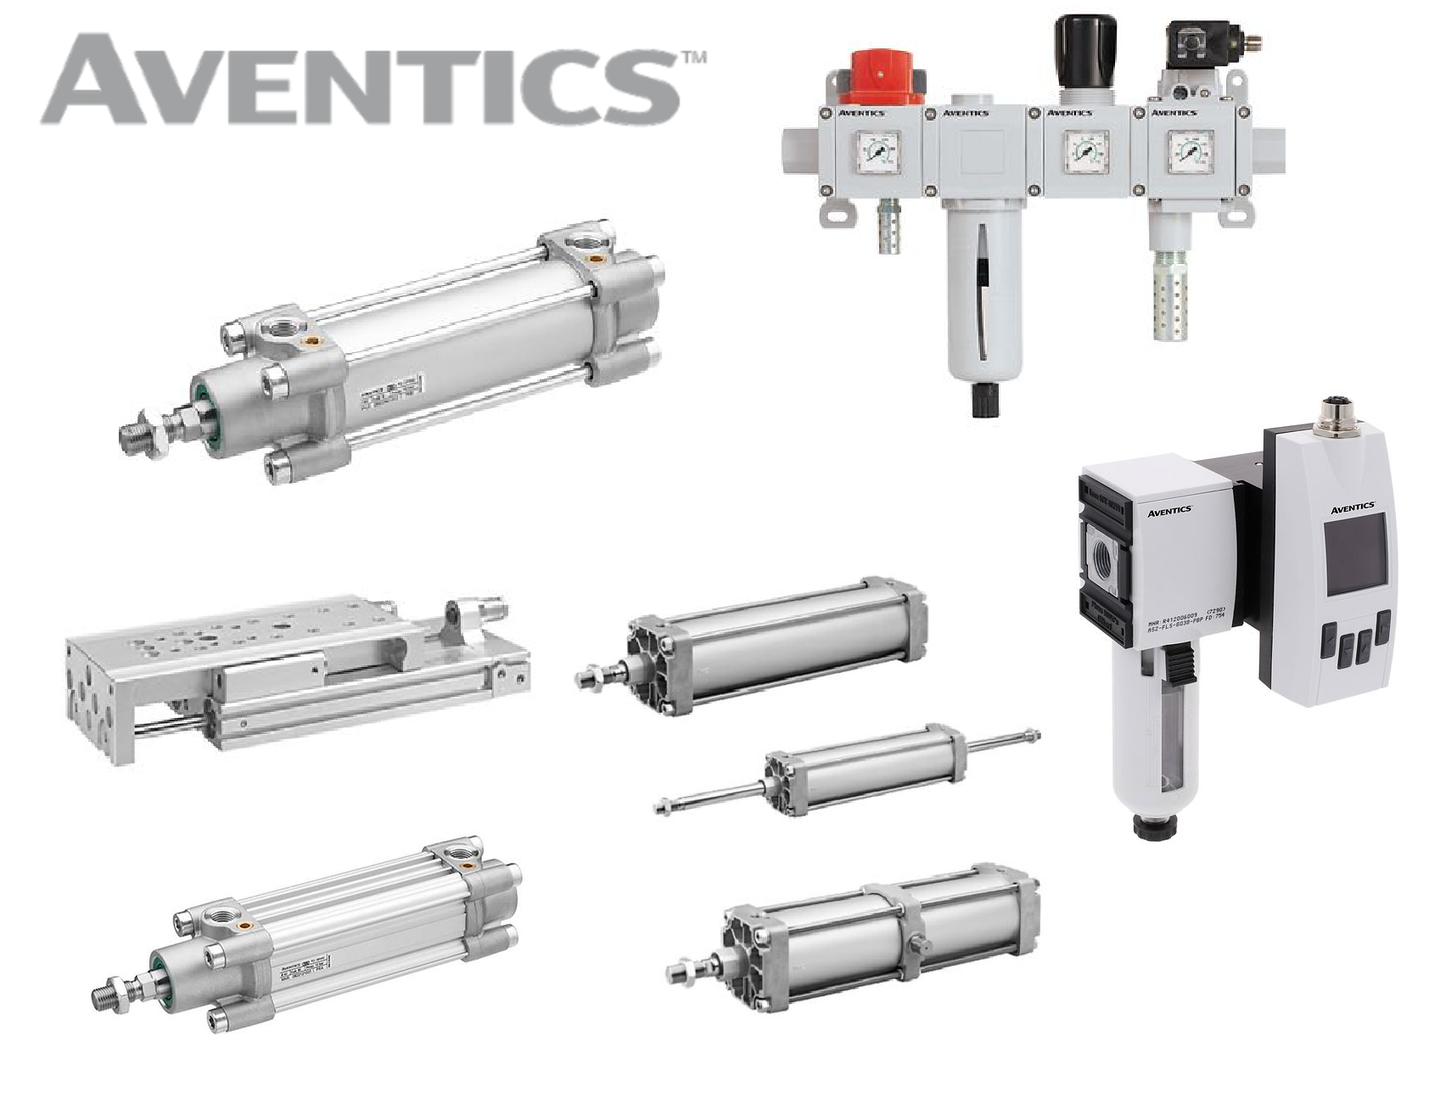 The application of Aventics brand under EMERSON in various fields